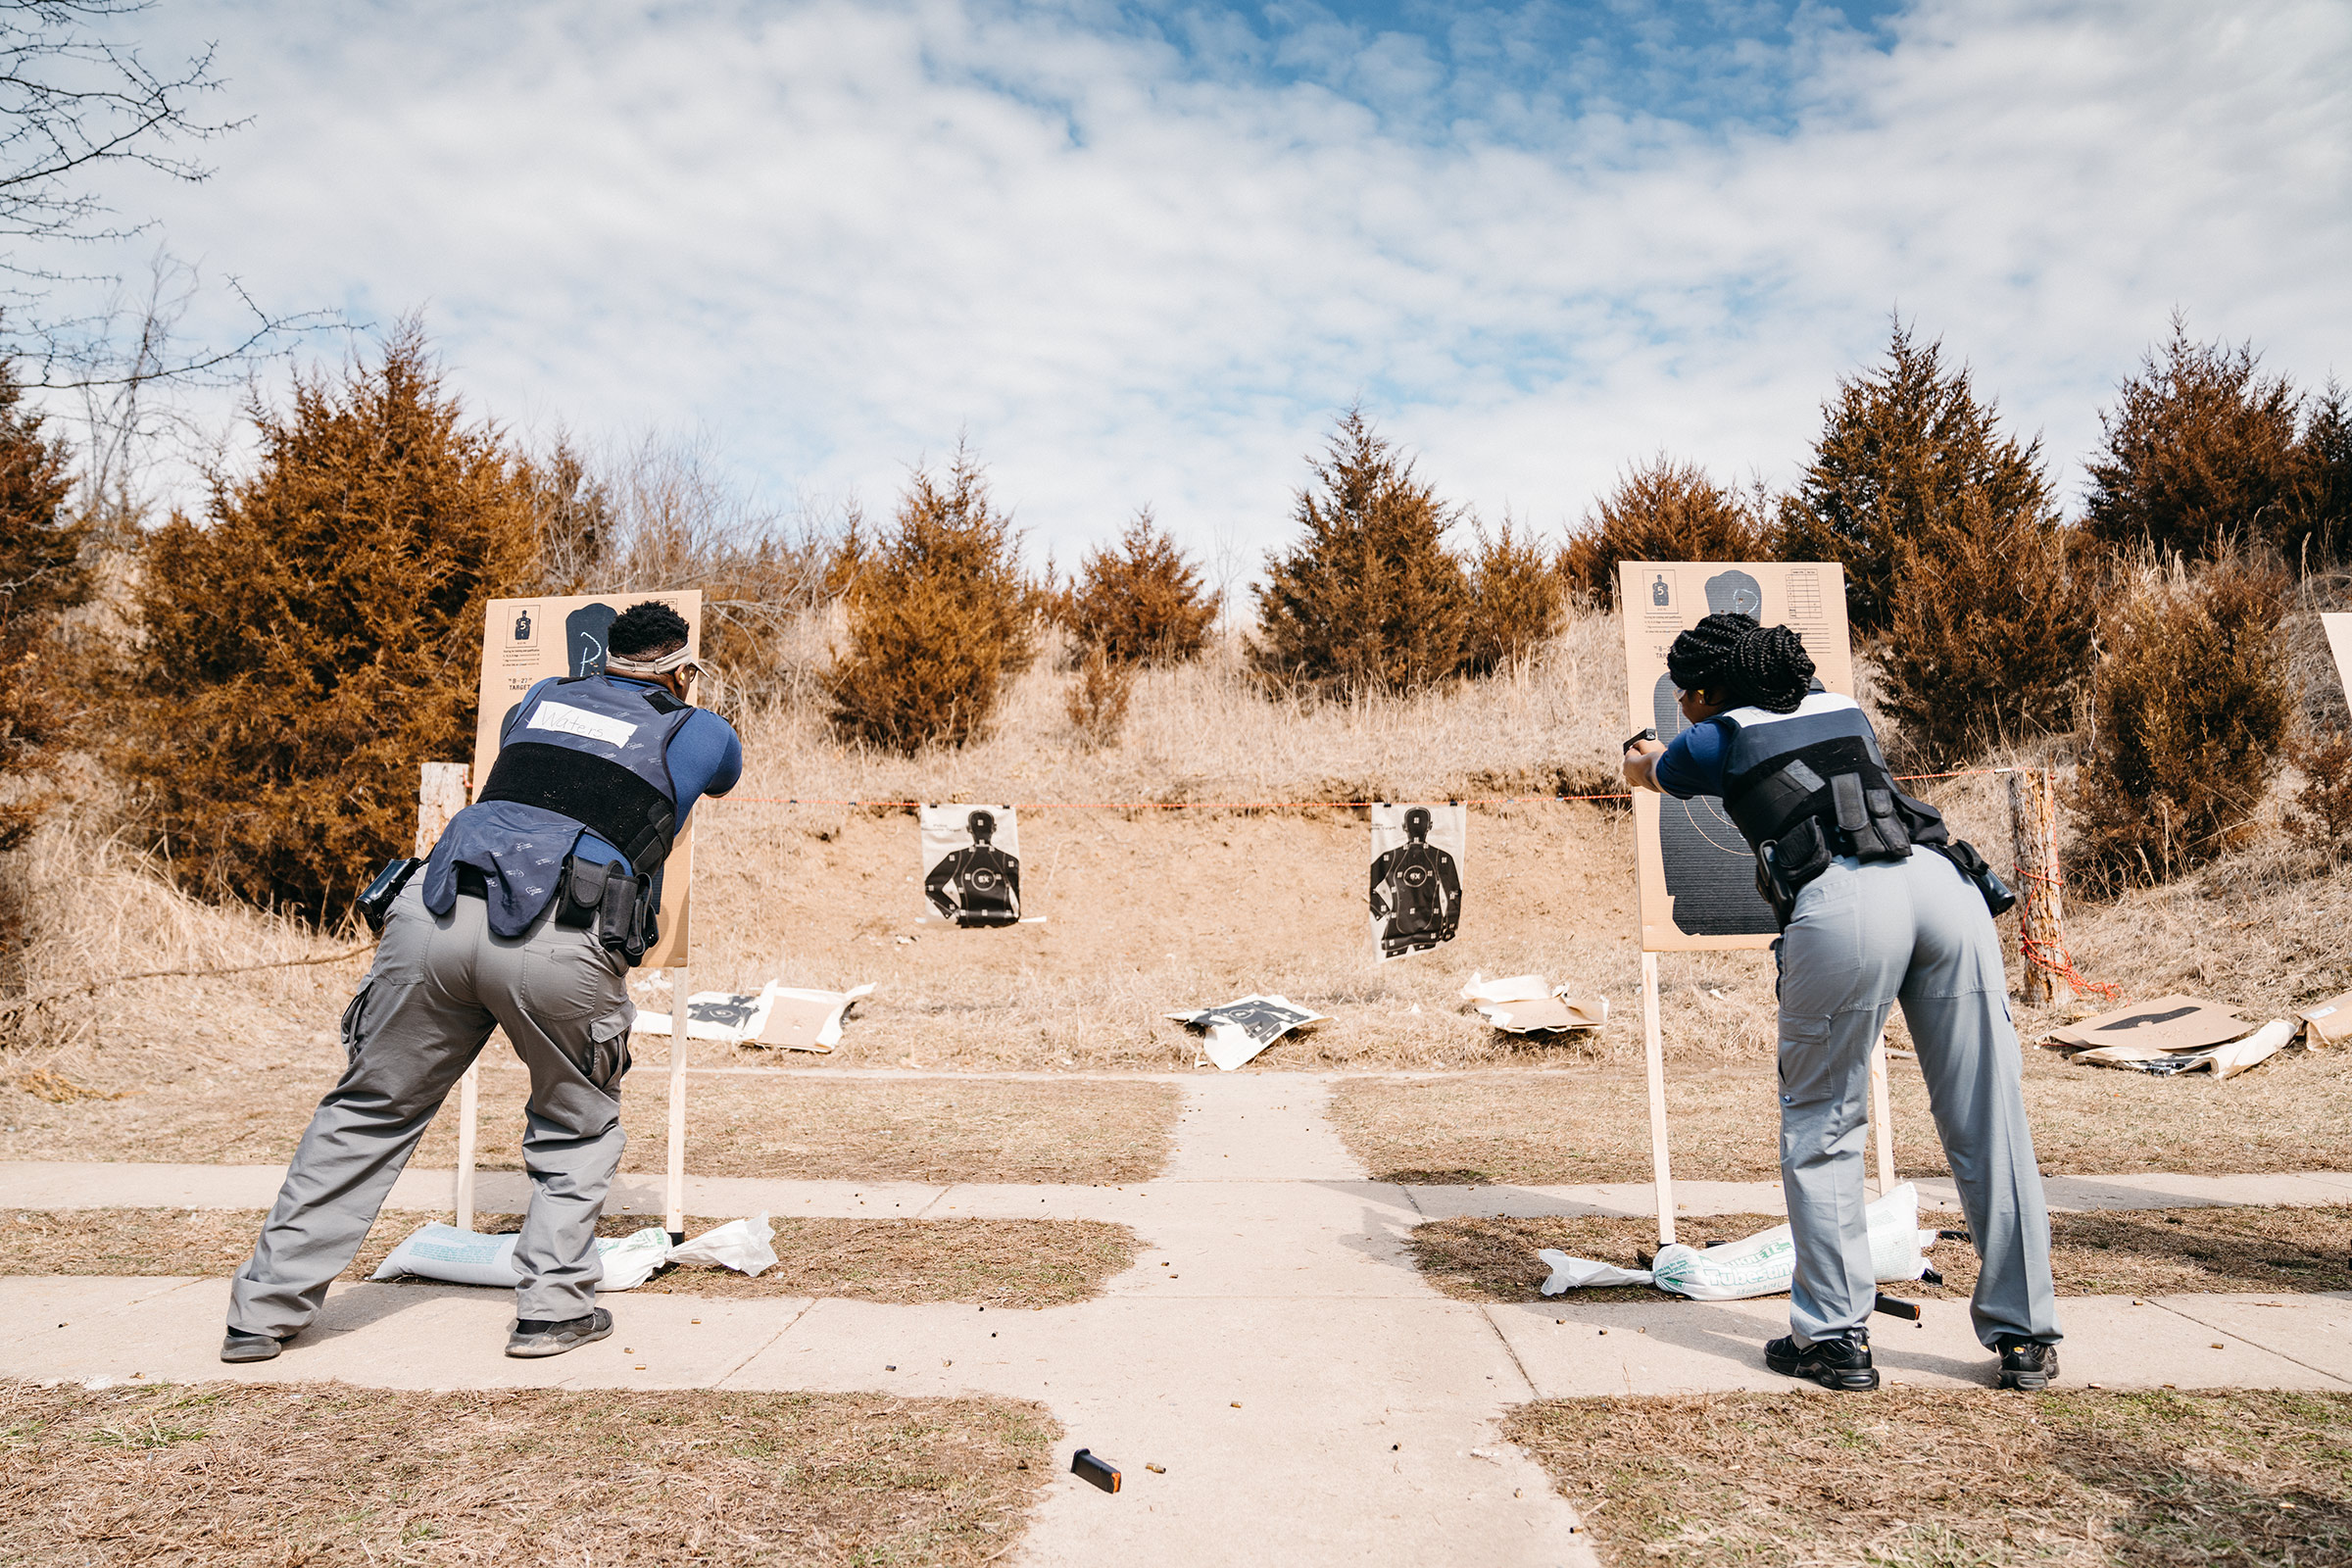 Two students during firearms training at a shooting range in Missouri on March 6 (Joe Martinez for TIME)